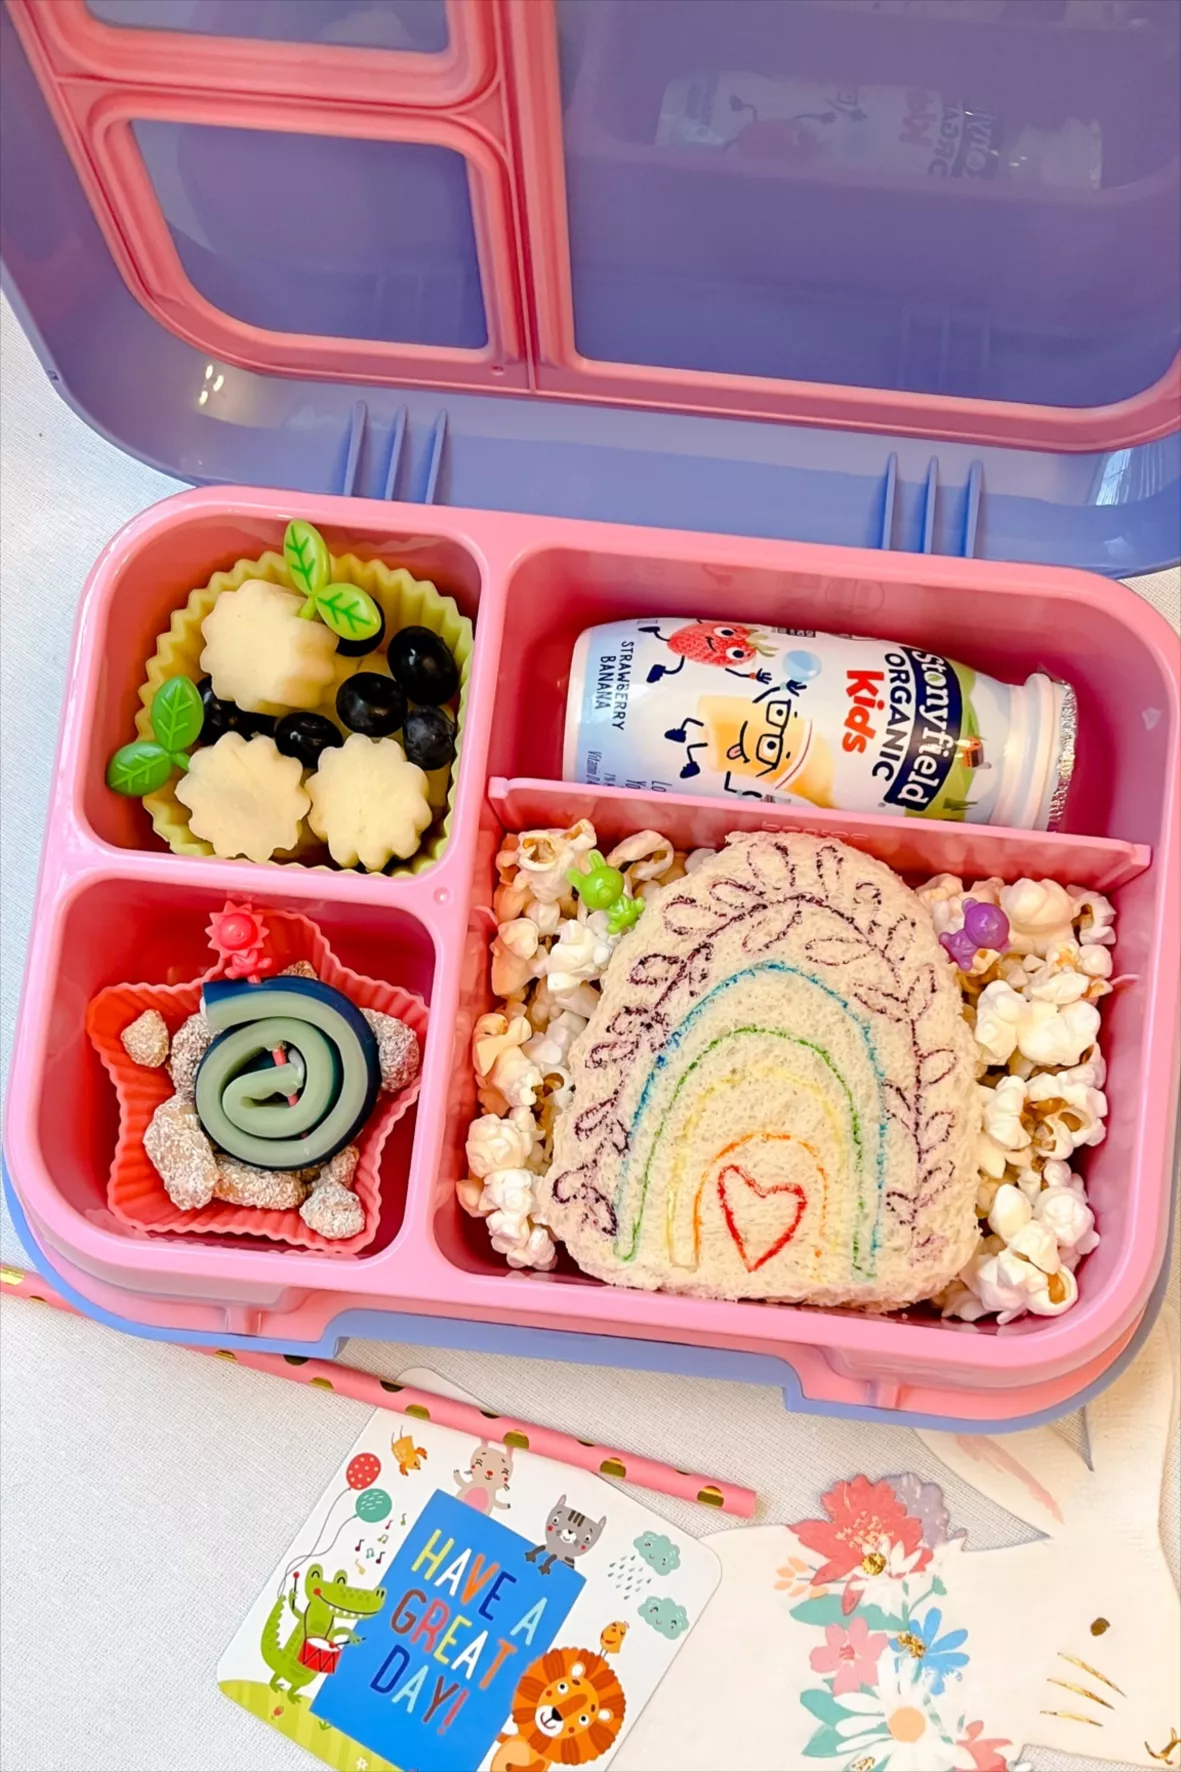 The Brick Castle: Back To School with Munchkin Bento Mealtime Sets